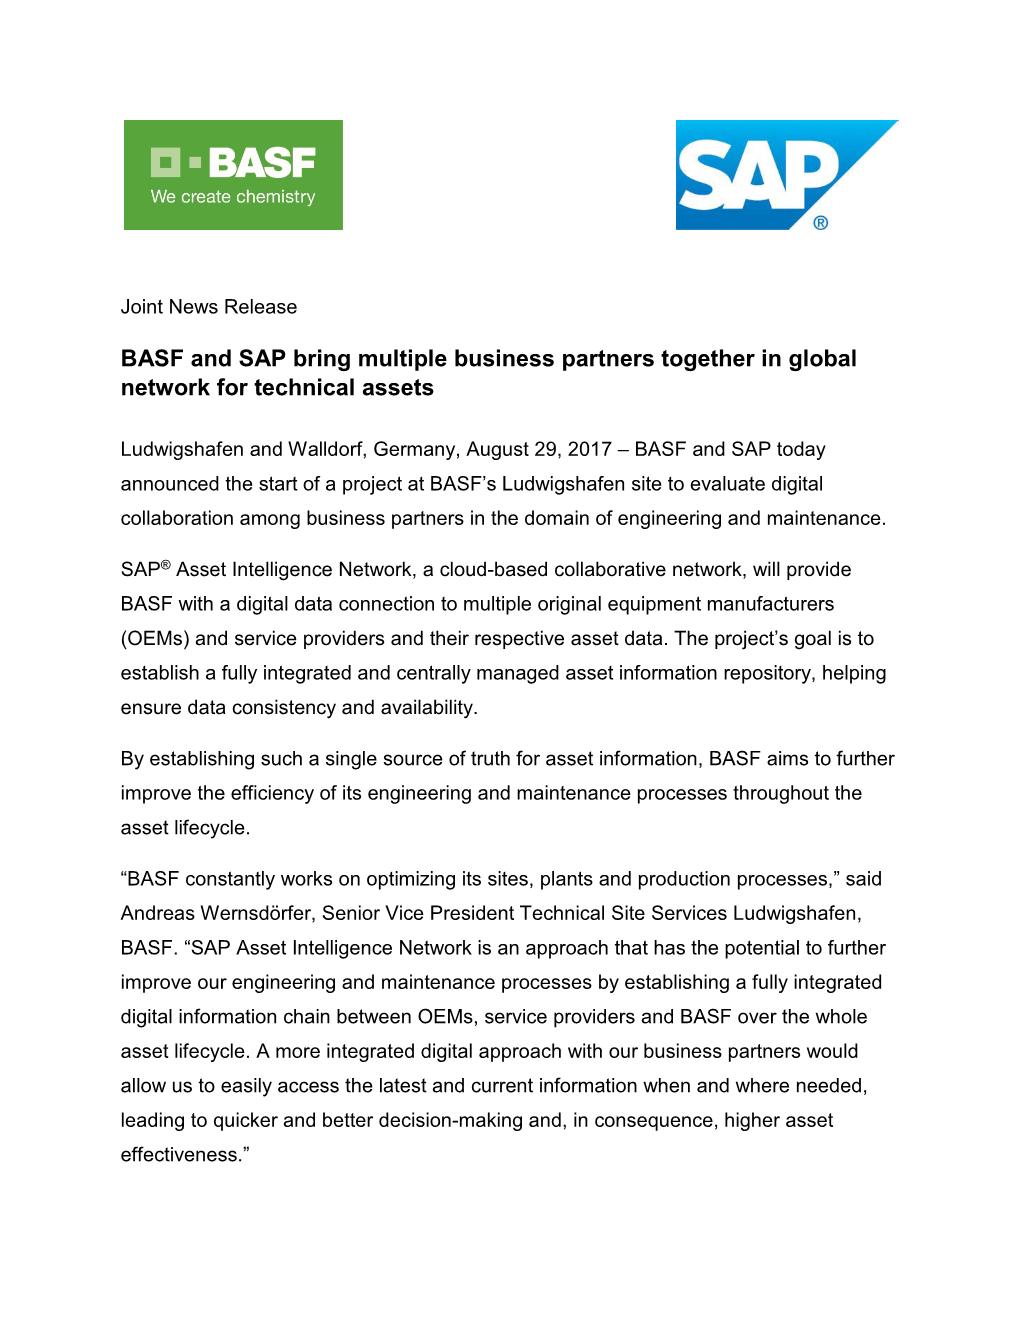 BASF and SAP Bring Multiple Business Partners Together in Global Network for Technical Assets